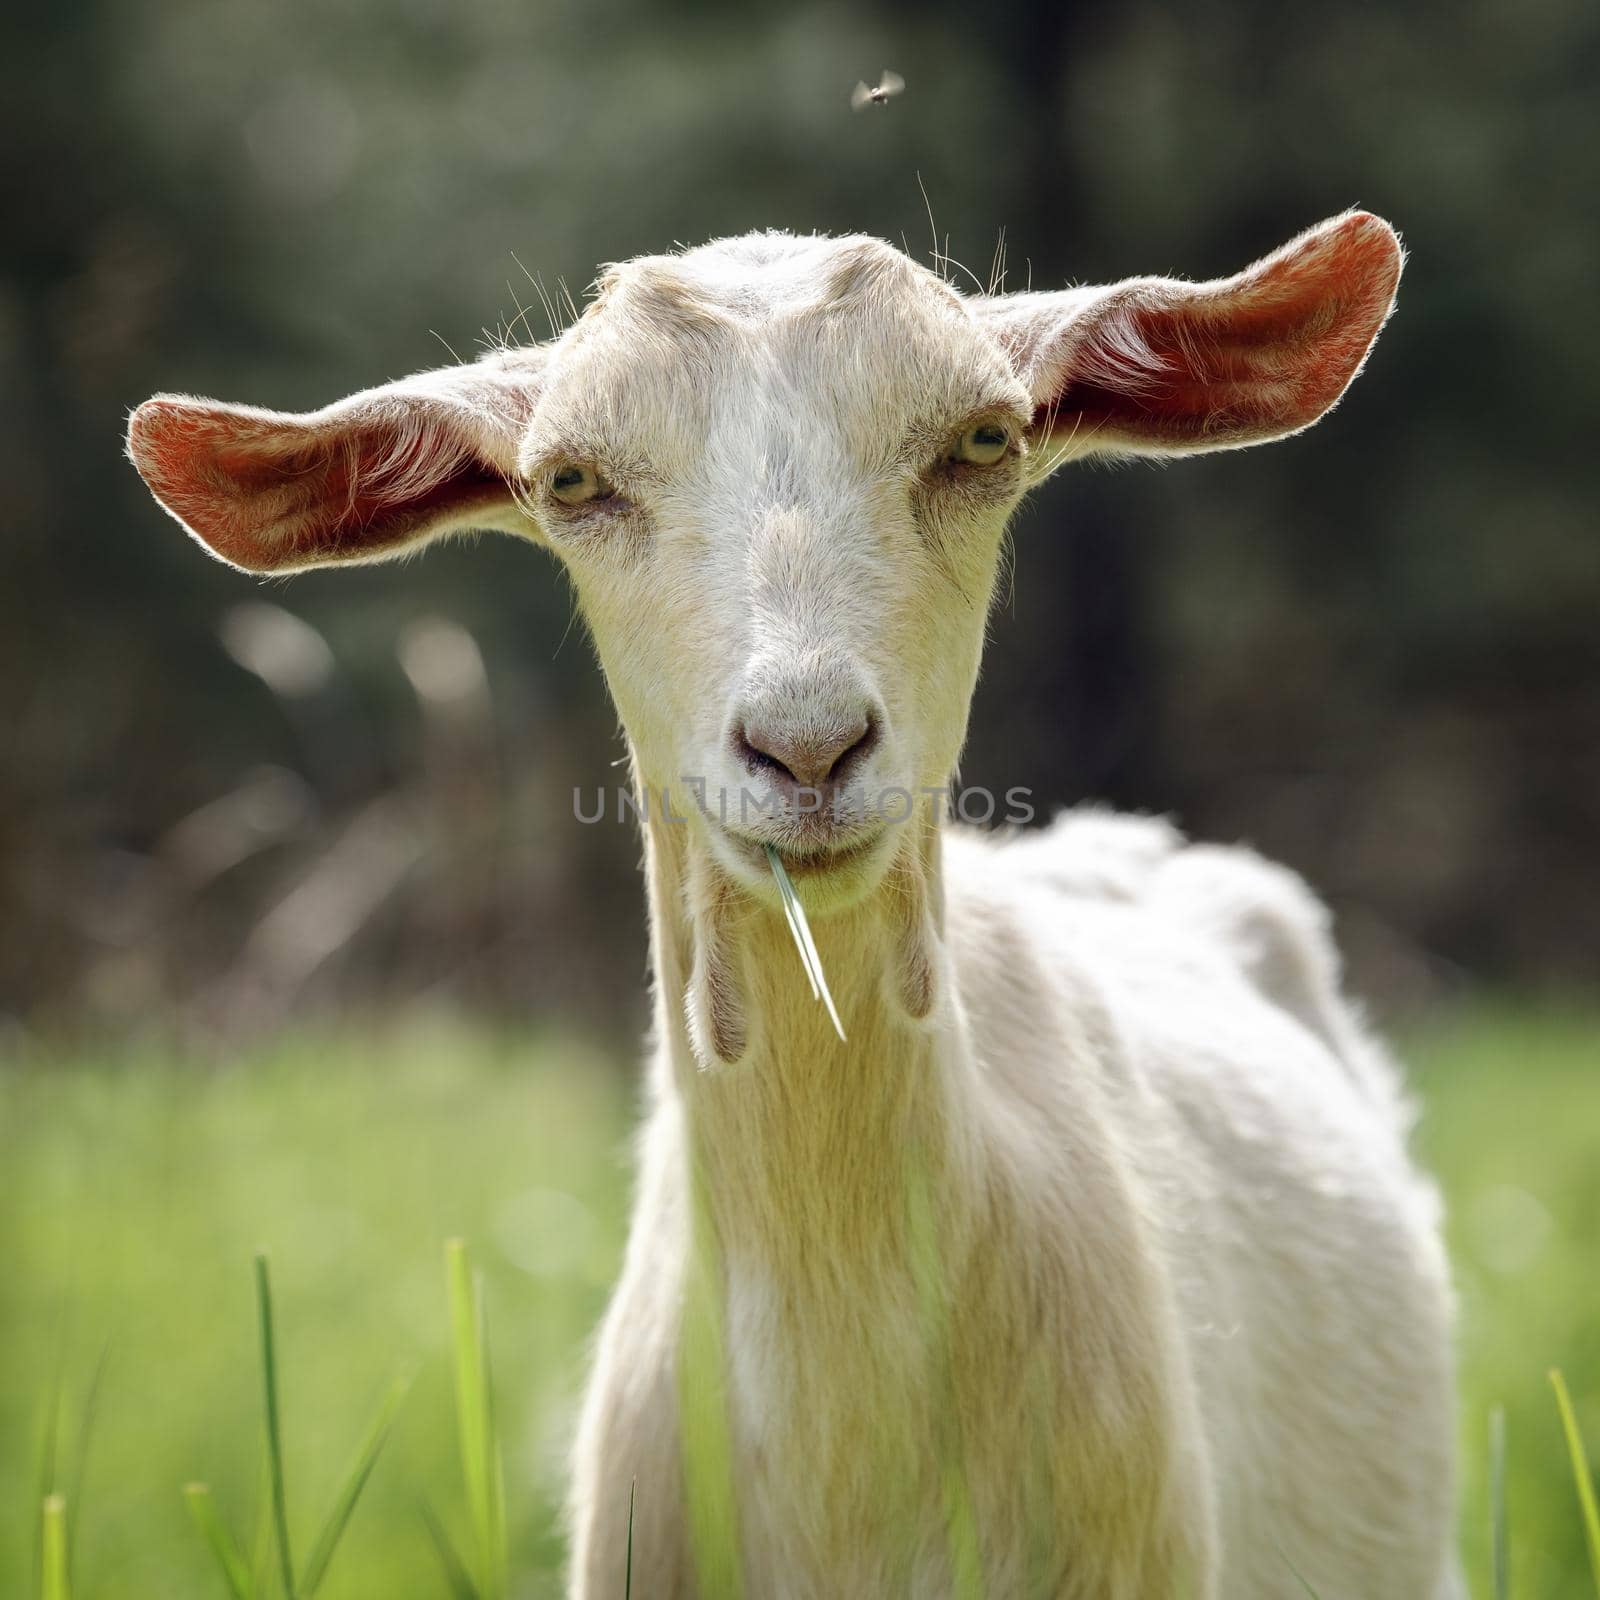 A white young goat with big ears and grass in his mouth looks at the camera. Green blurred forest background, hot day and fly overhead.